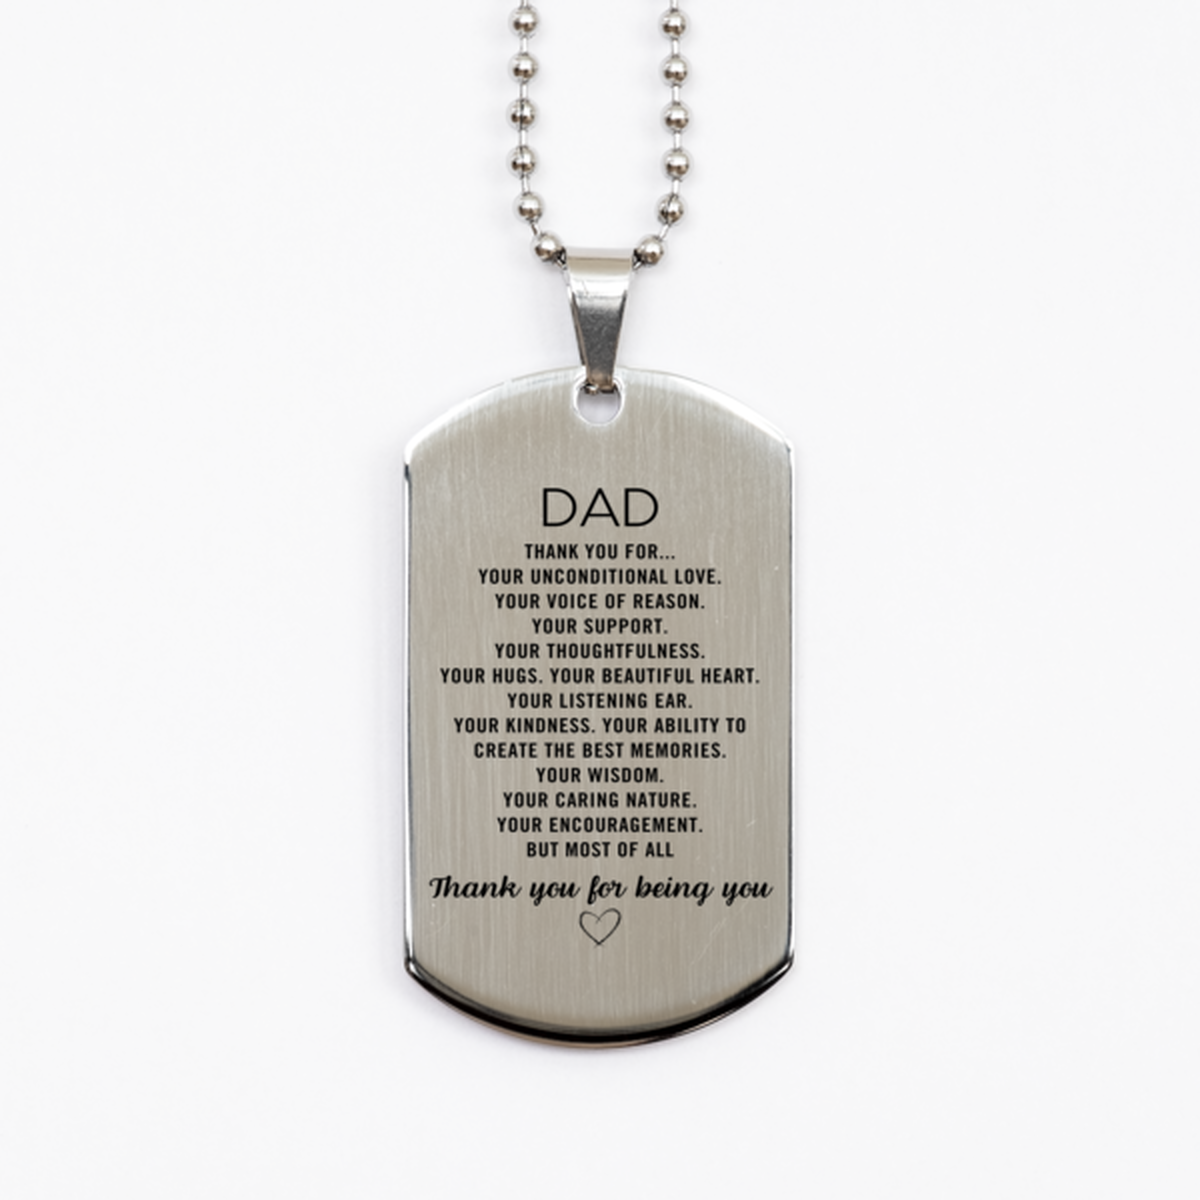 Dad Silver Dog Tag Custom, Engraved Gifts For Dad Christmas Graduation Birthday Gifts for Men Women Dad Thank you for Your unconditional love